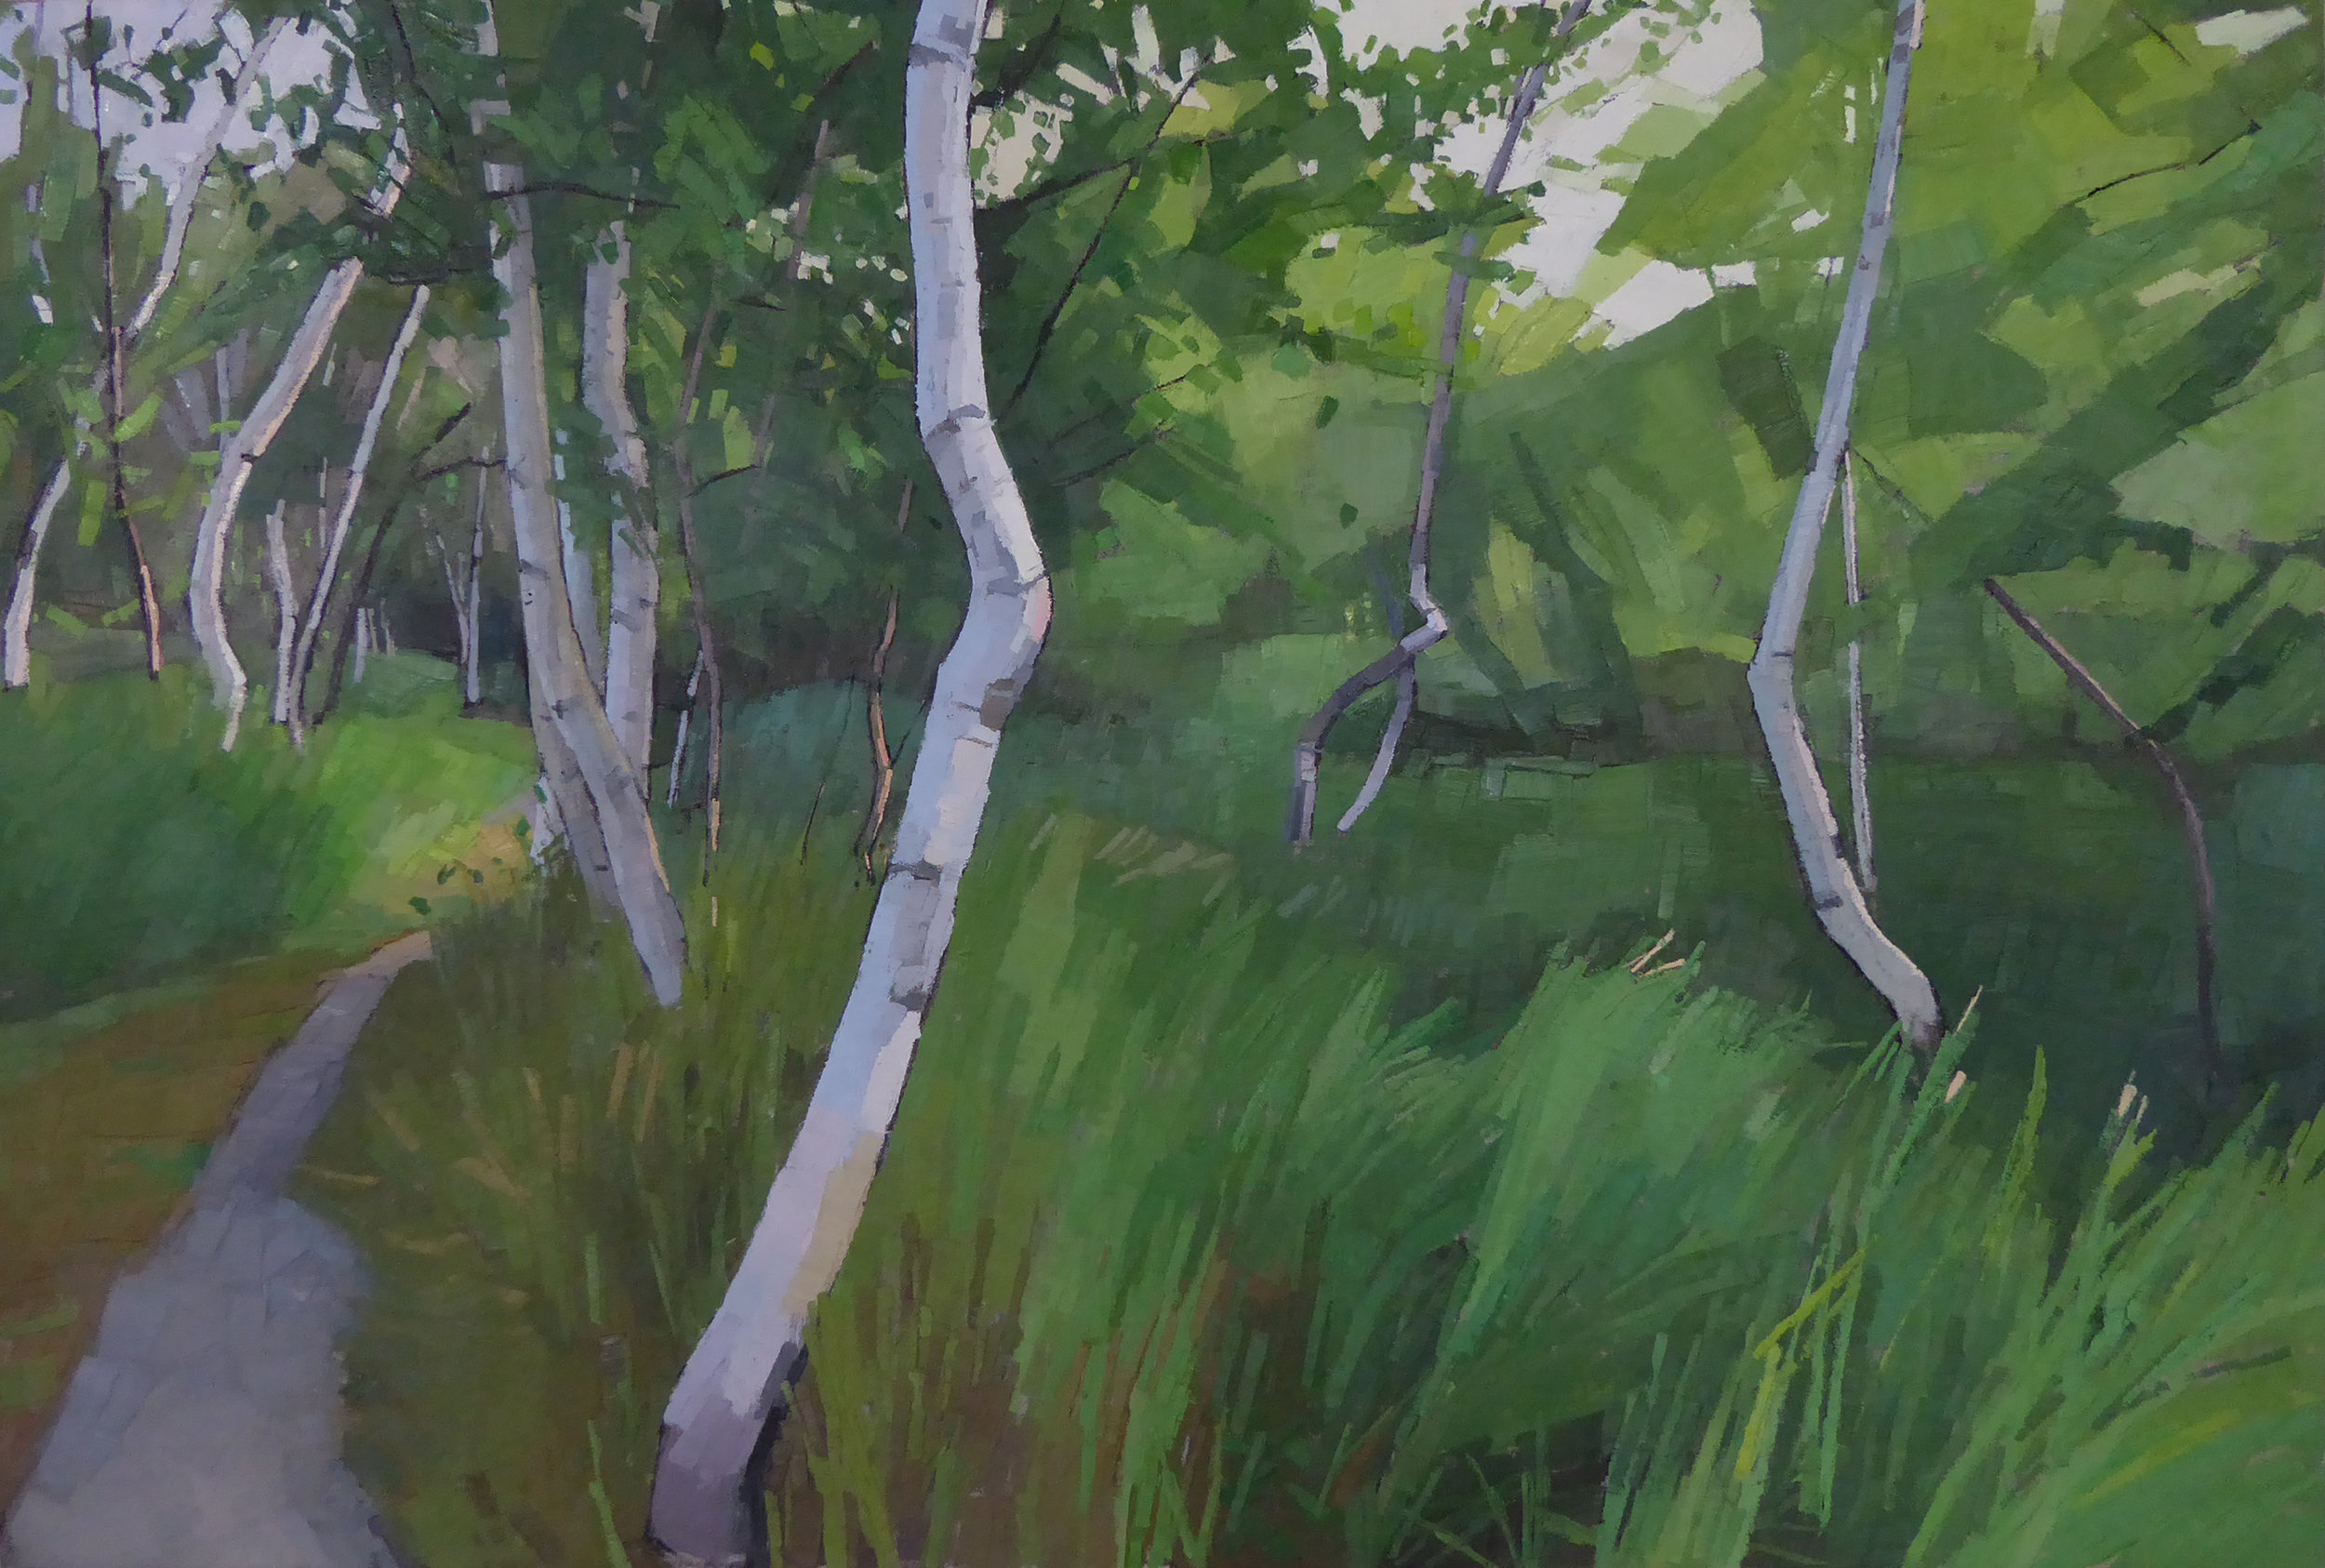   Crooked Birches  24 x 36 oil on linen  sold   NW Barrett Gallery  